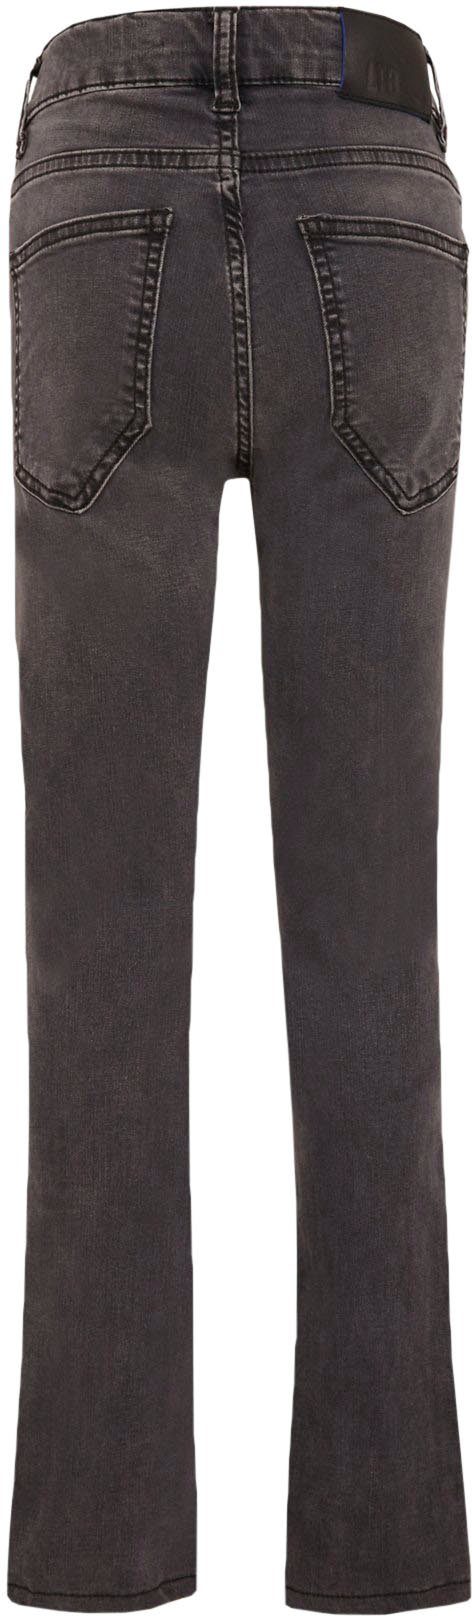 mit Skinny-fit-Jeans BOYS LTB almost JIM black for Stretch,